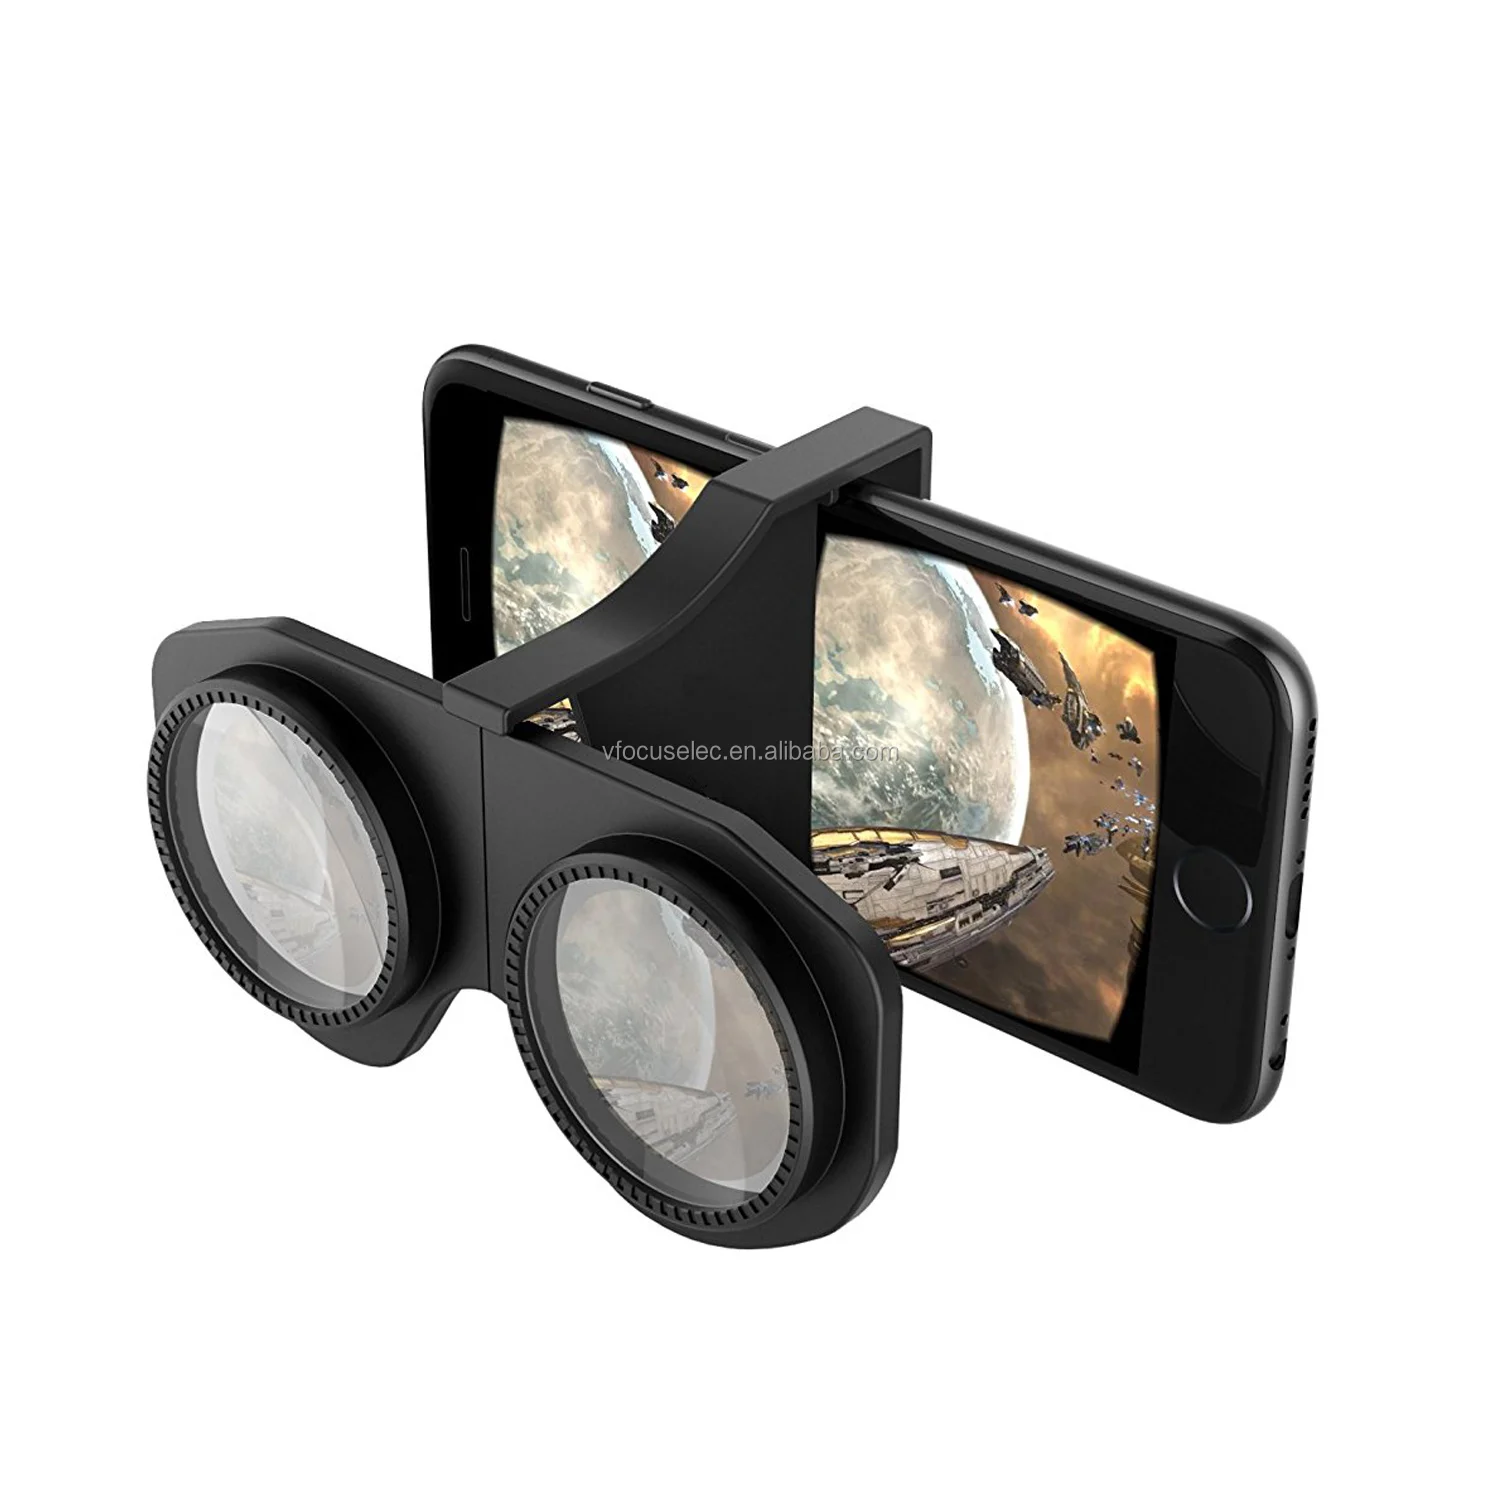 

Ultra light Portable Foldable Vr Glasses Vr Fold V1 3d Vr Virtual Reality Movie Games Glasses For Android Ios Pc, Customized color